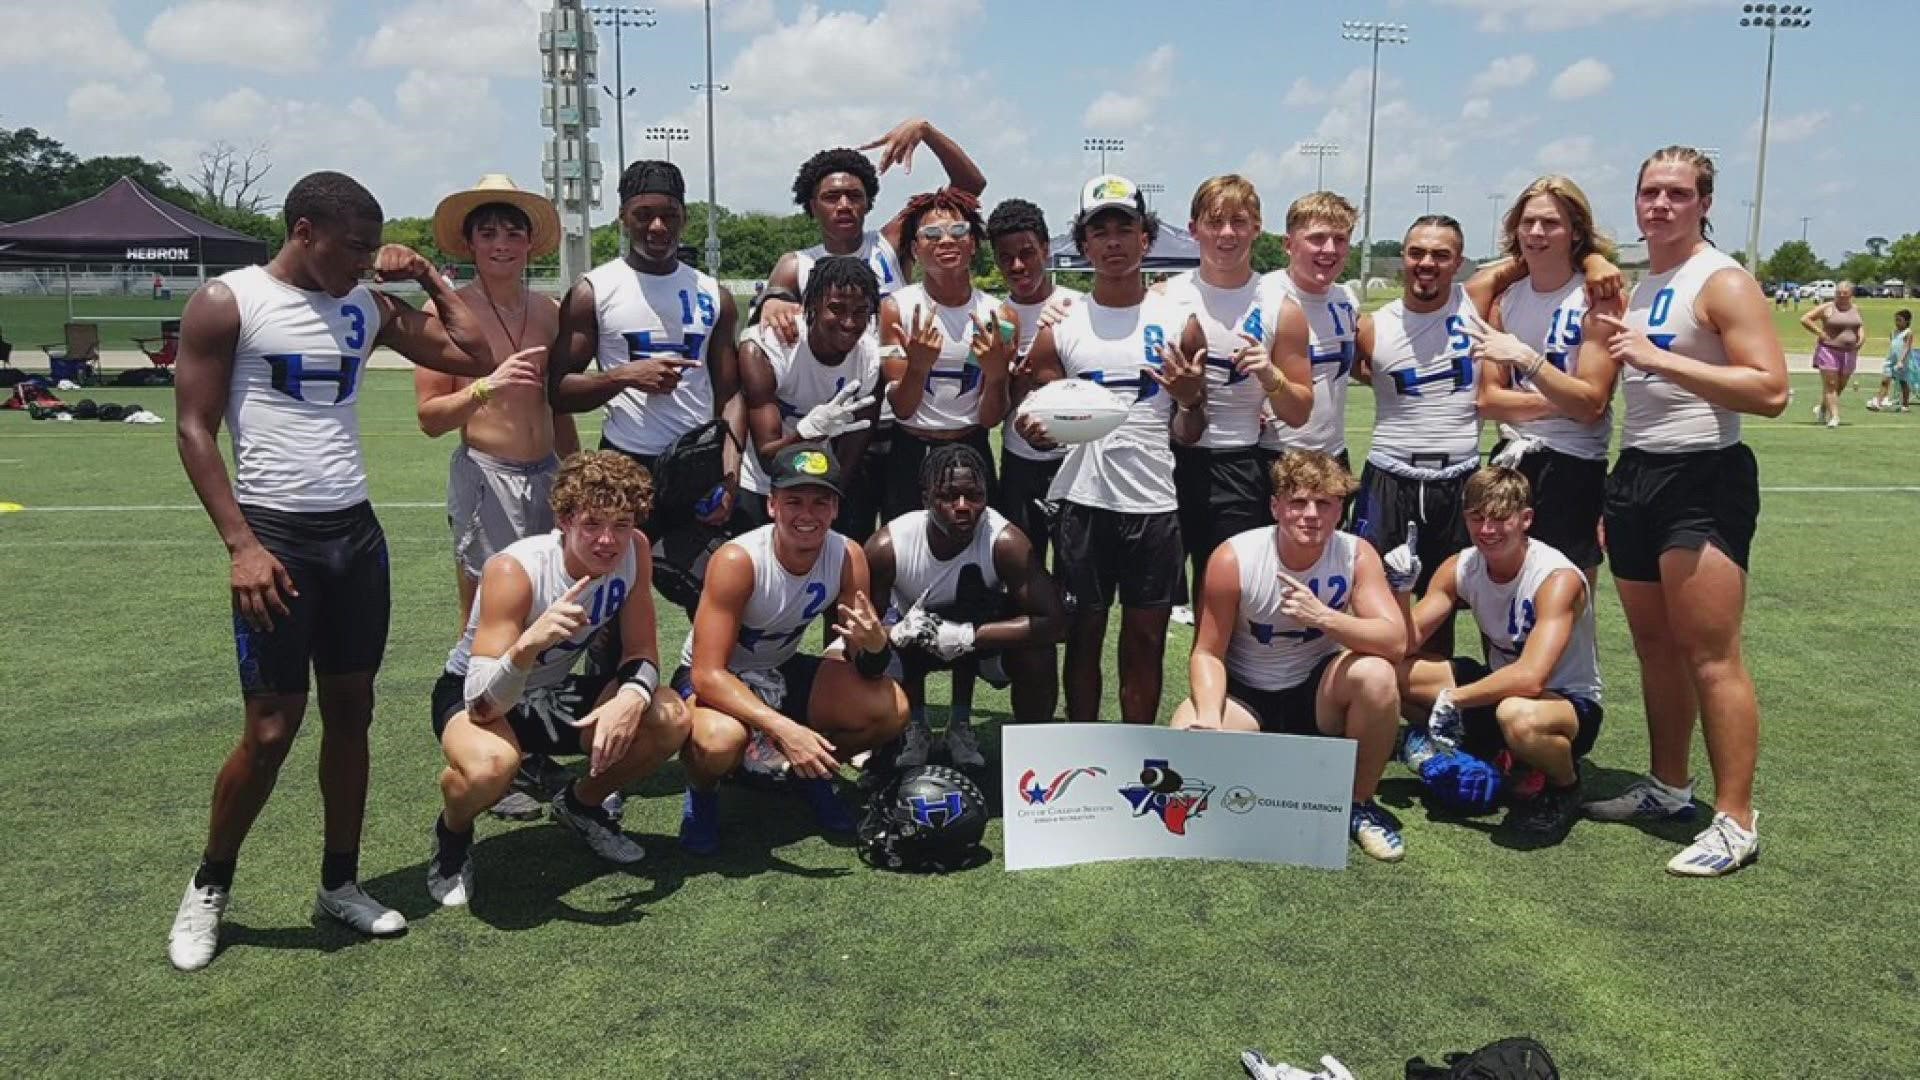 Hebron won the Texas state championship for 7-on-7 this summer.